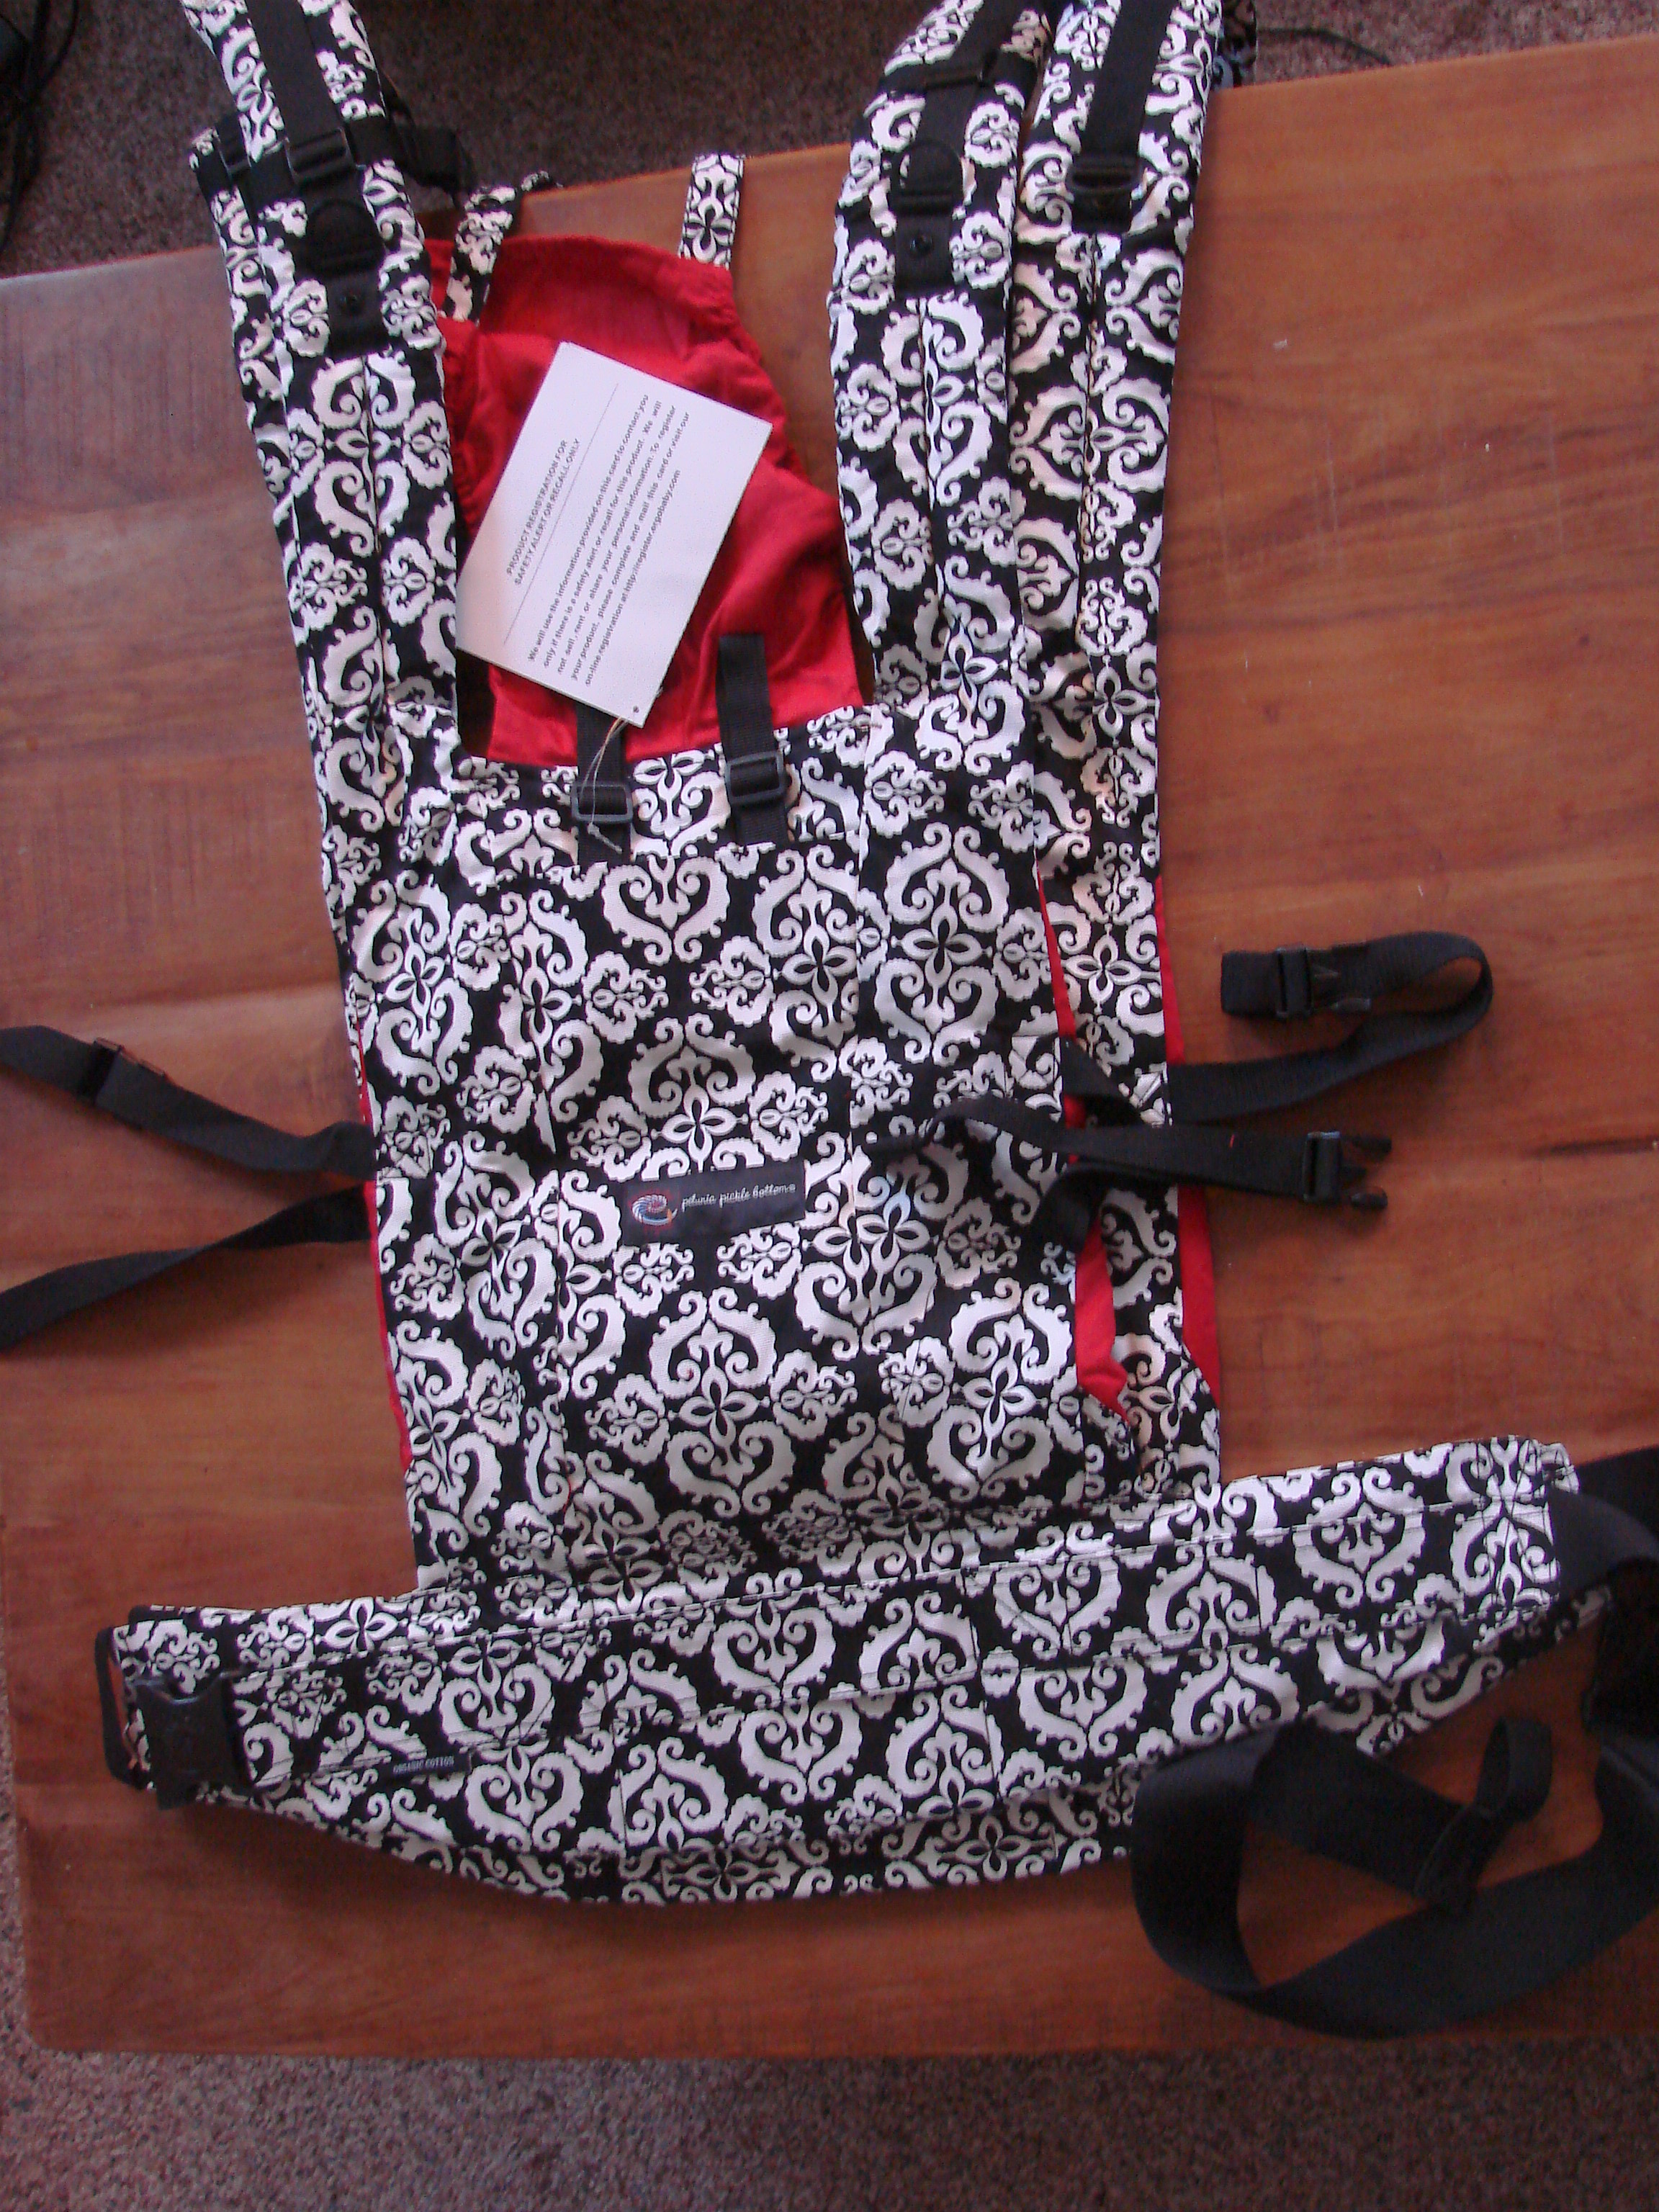 petunia pickle bottom baby carrier